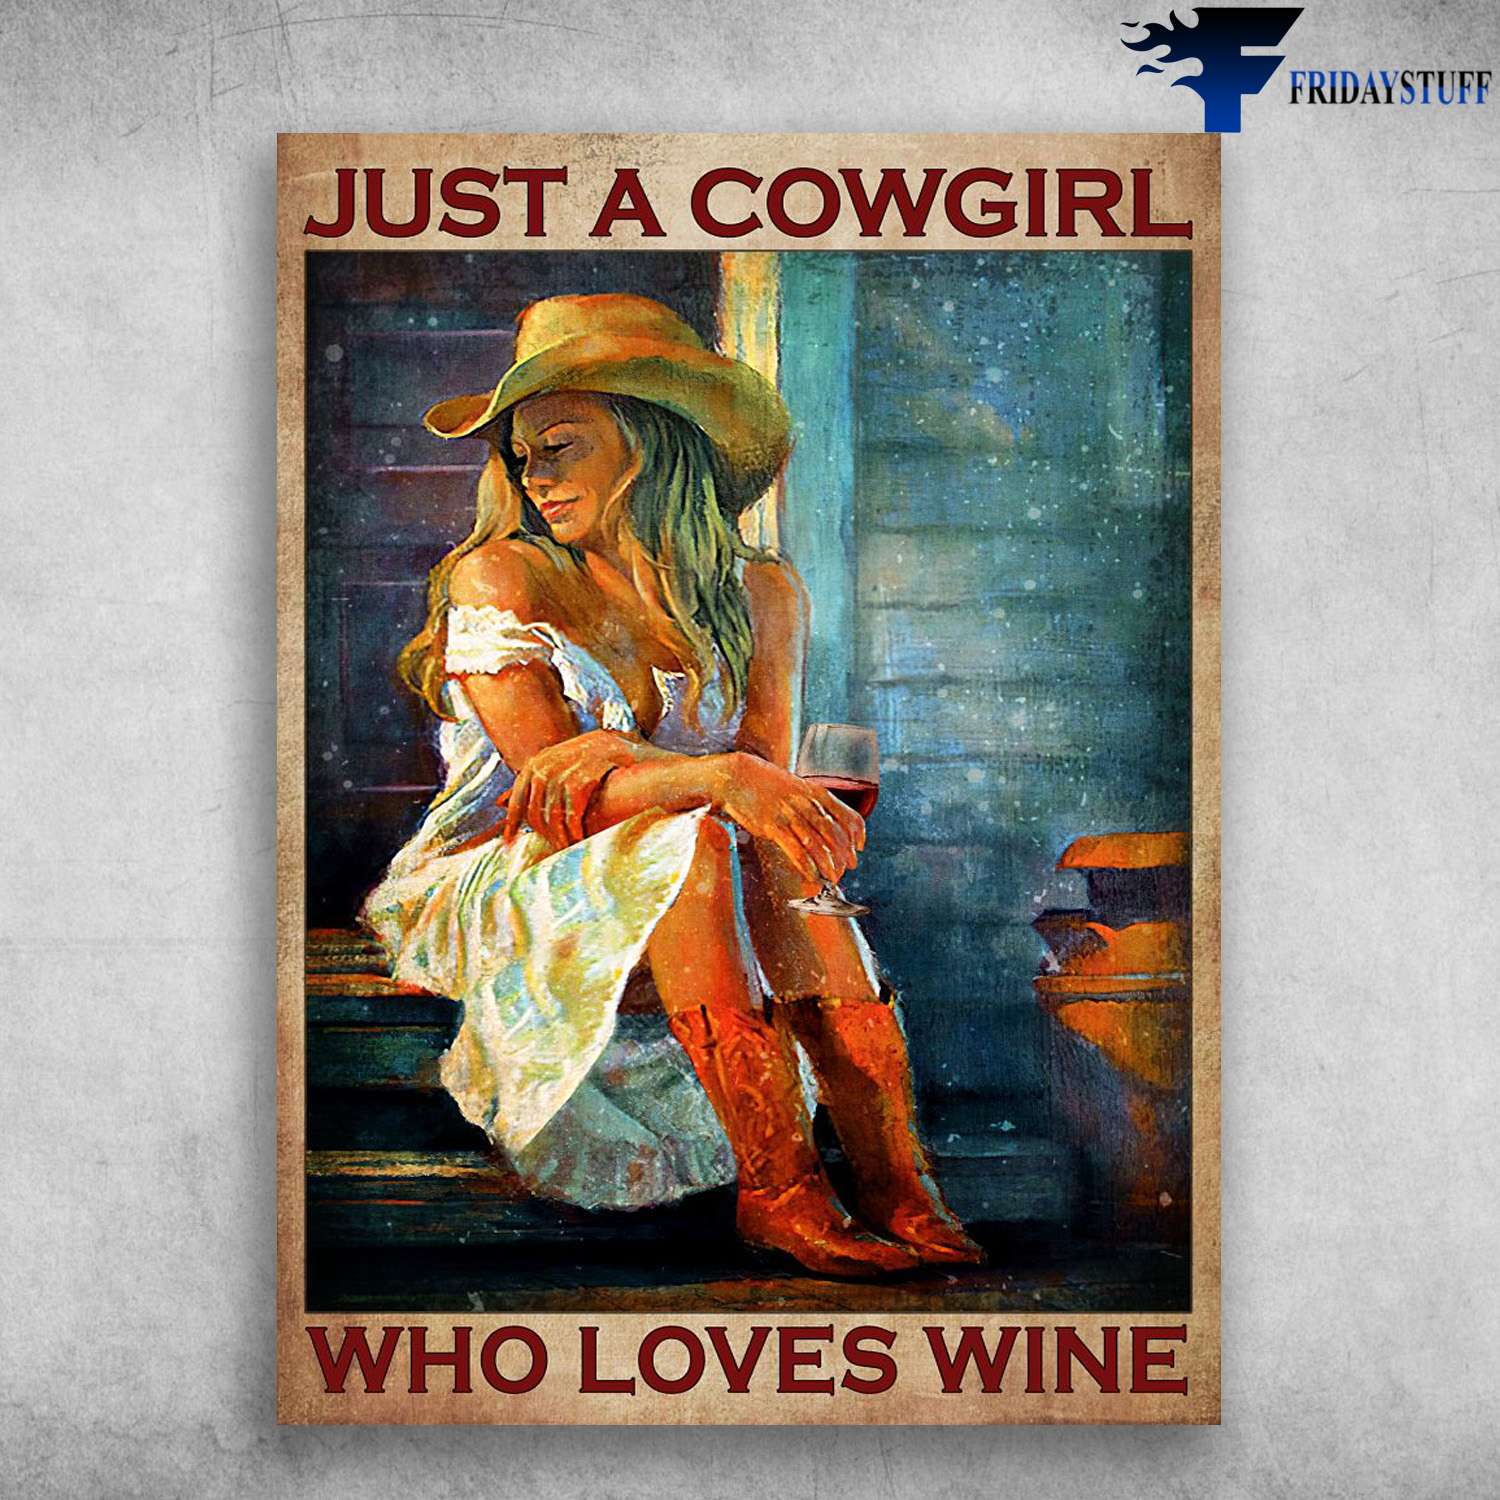 Cowgirl Drinks Wine - Just A Cow Girl, Who Loves Wines